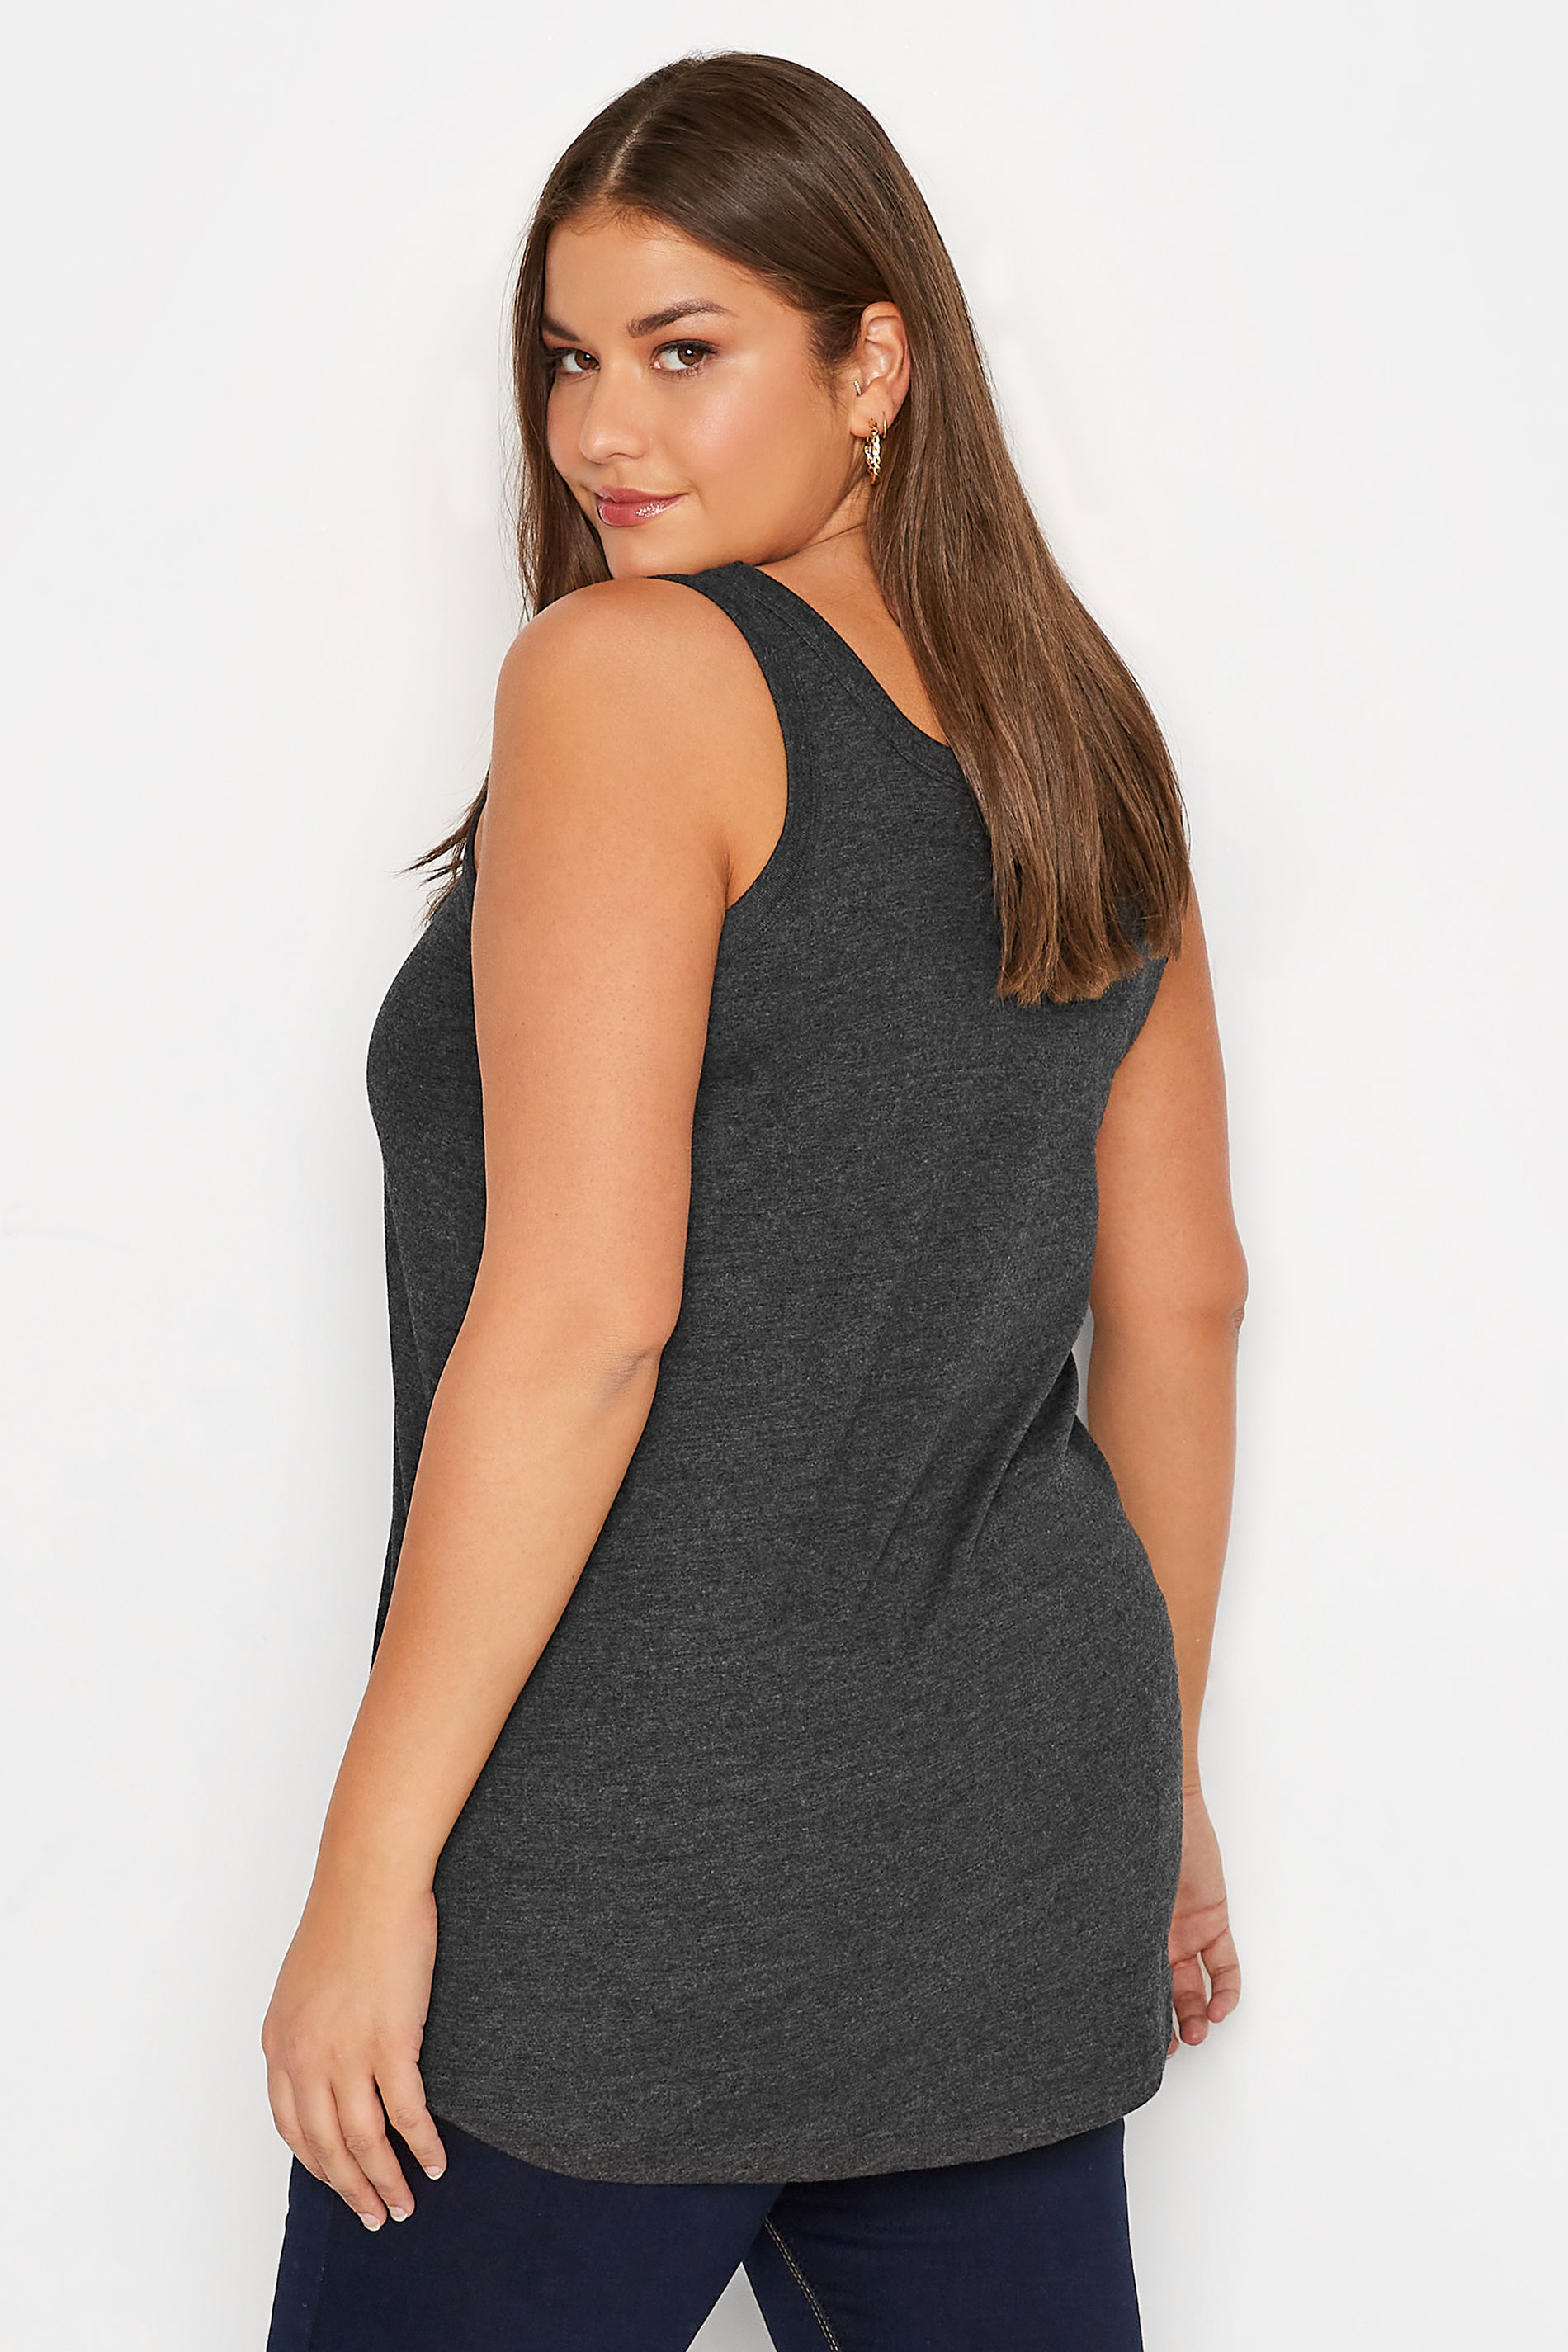 Plus Size Berry Red Marl Vest Top